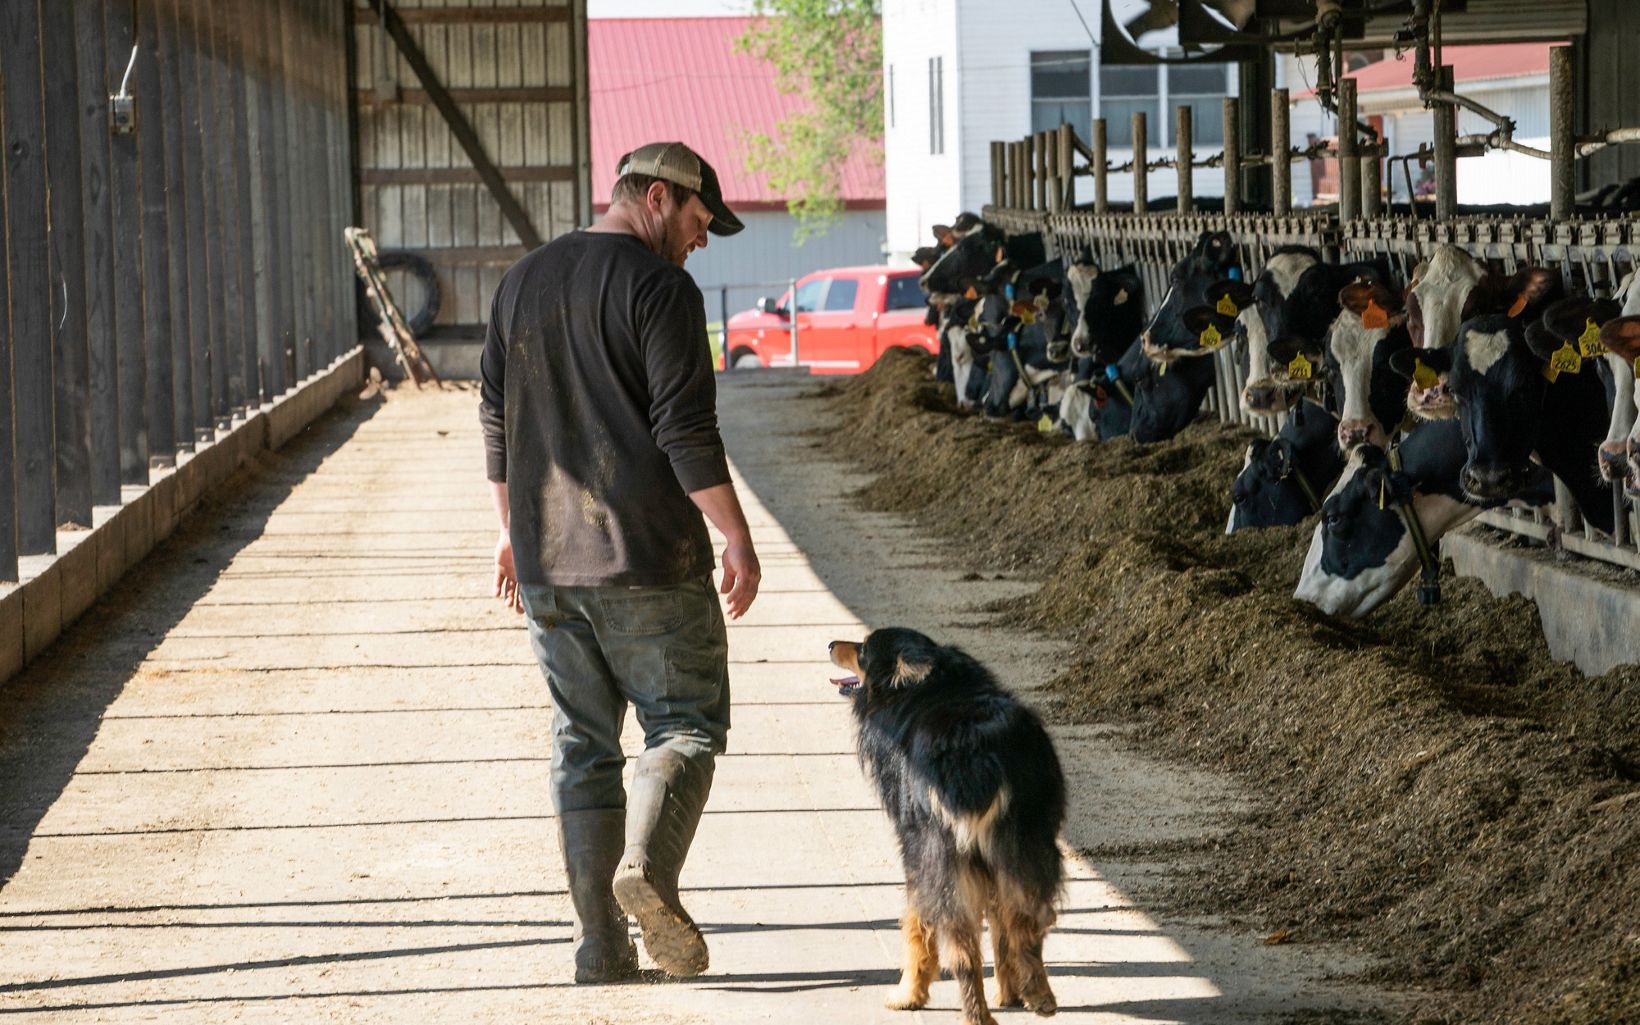 Cody Carpenter of Redrock View Farms walks through a dairy barn past a row of black-and-white cows sticking their heads out of their milking stalls; his black-and-brown dog walks at his side.